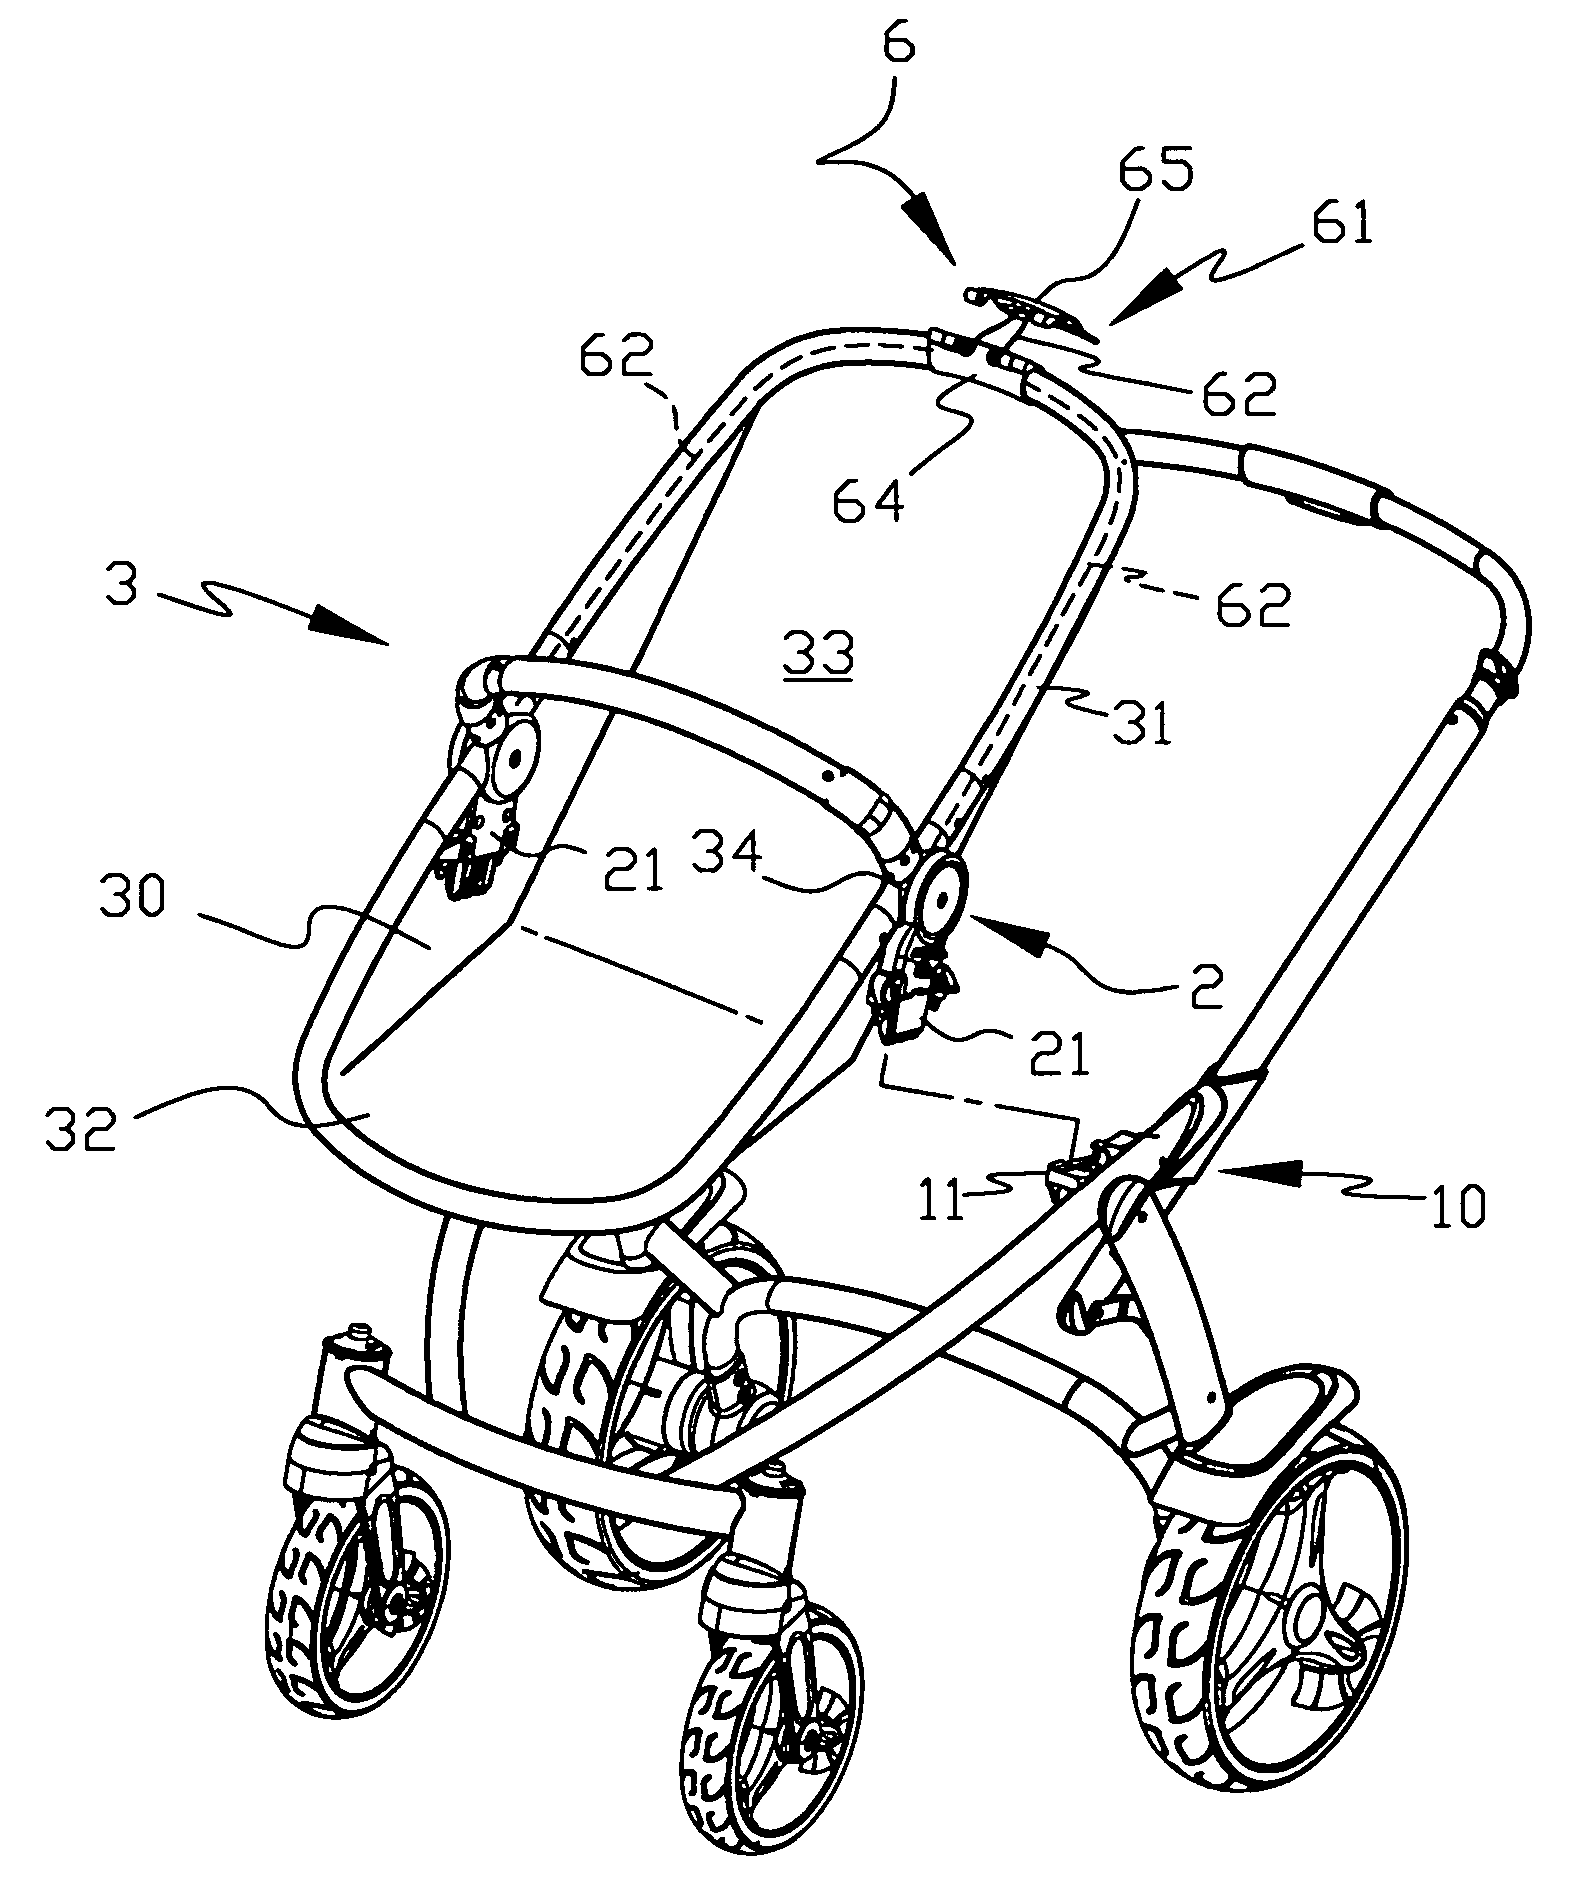 Adjustable seat for a baby stroller with one-handed inclination control